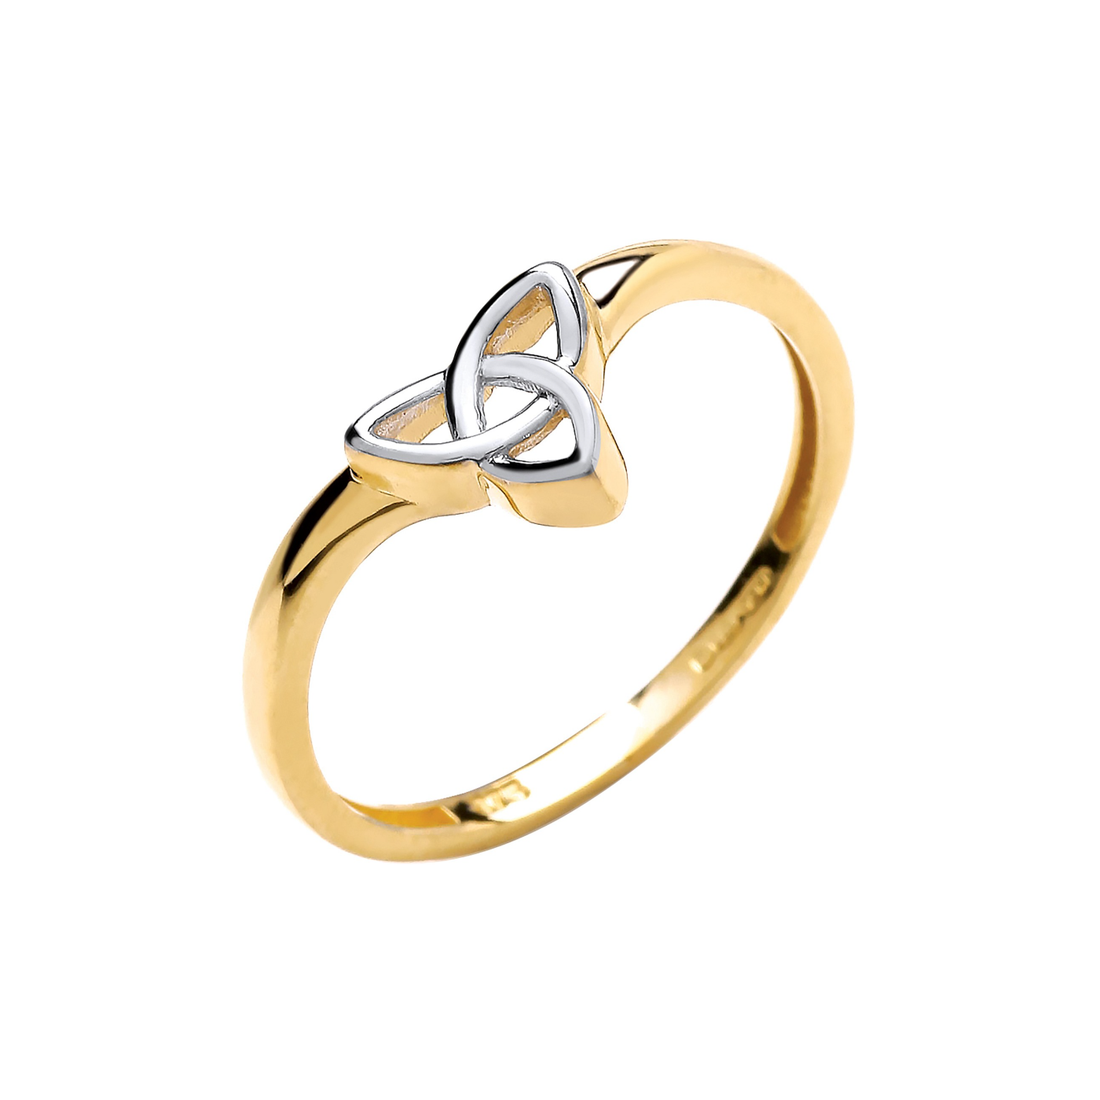 9ct Yellow and White Gold 2 Colour Wishbone Style Celtic Ring - Robert Anthony Jewellers, Edinburgh